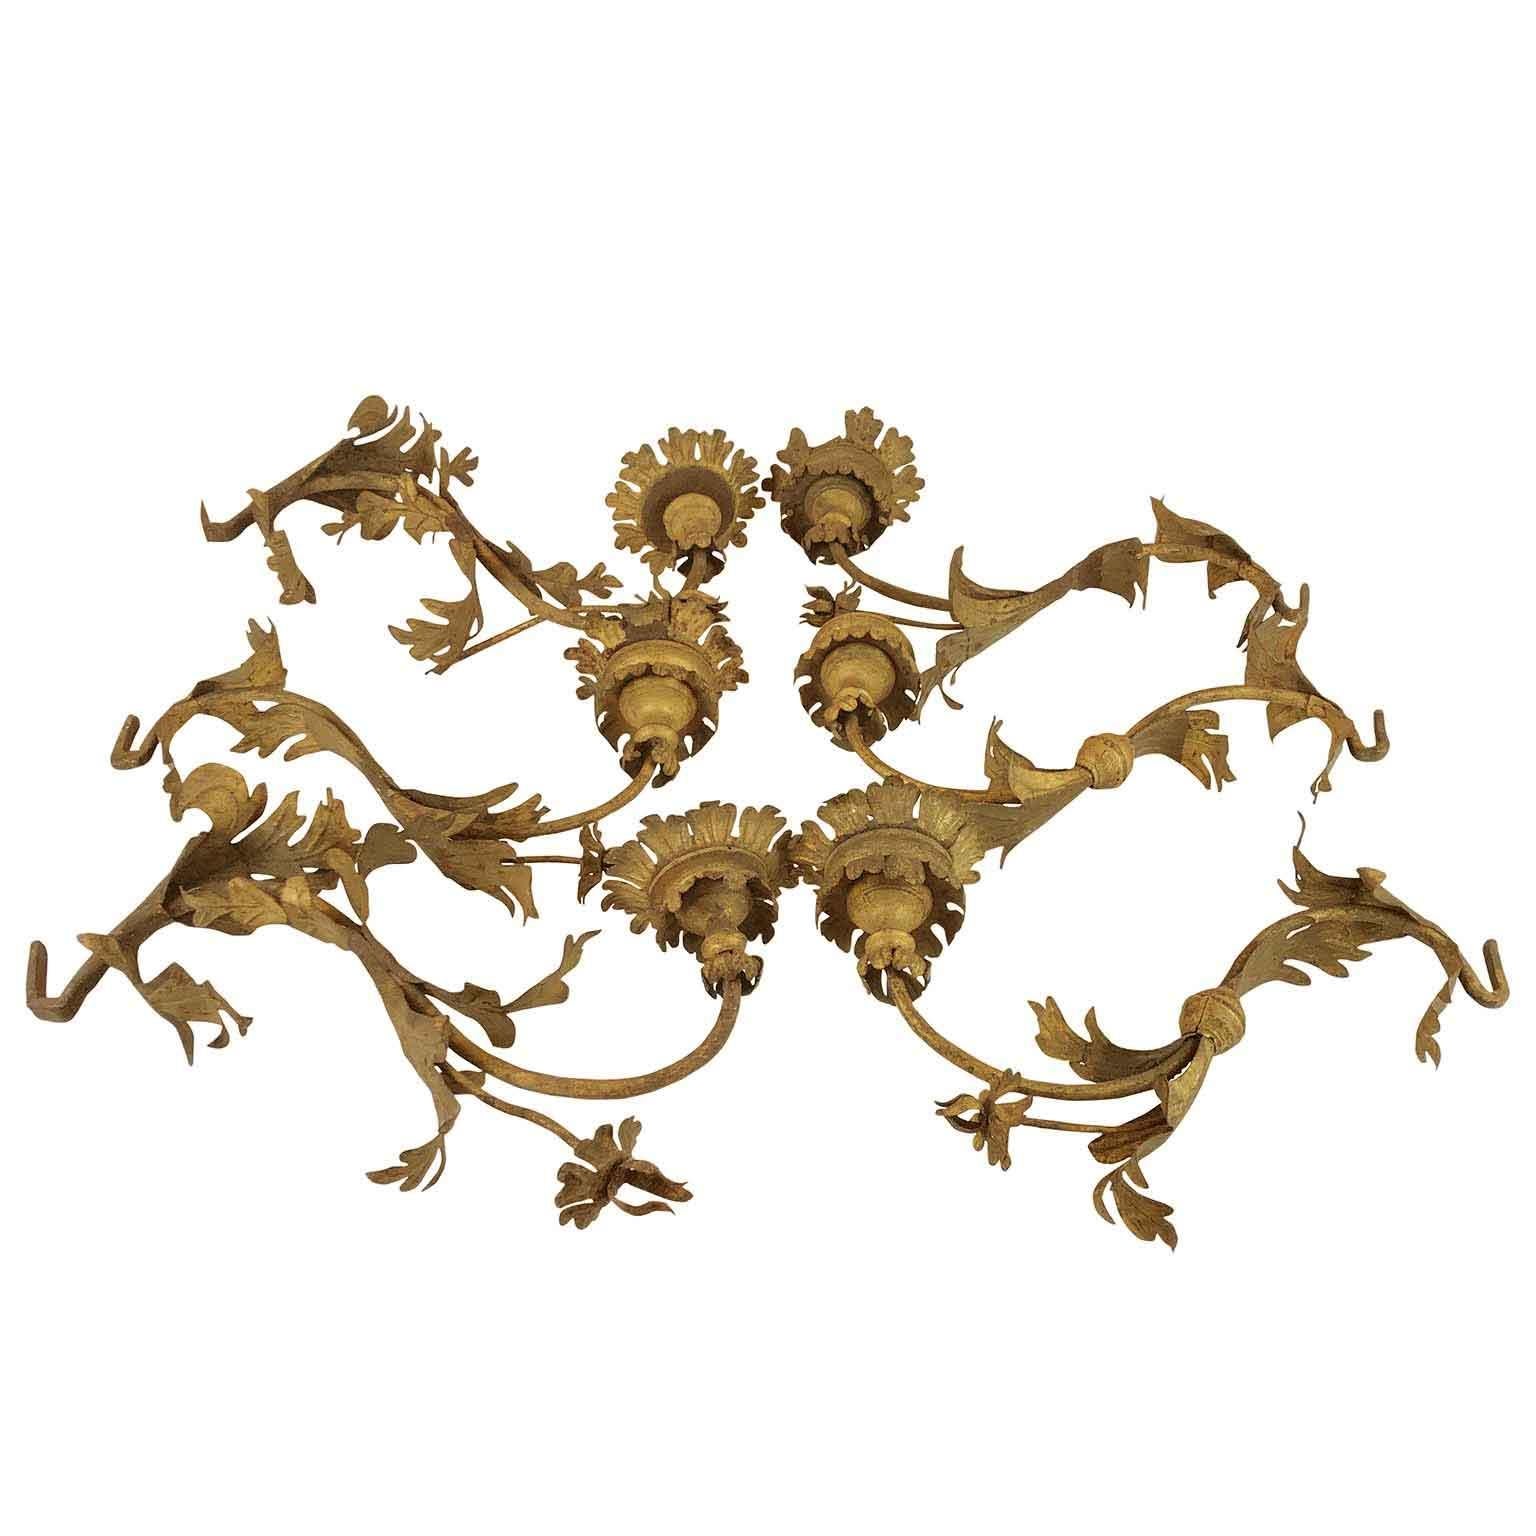 From Northern Italy a rare set of six 18th century gilt wrought iron arms, candle holders, hanging lantern brackets suitable as sconces, if you wire them.  These iron arms are fully handmade with curved scrolling iron structure, decorated with